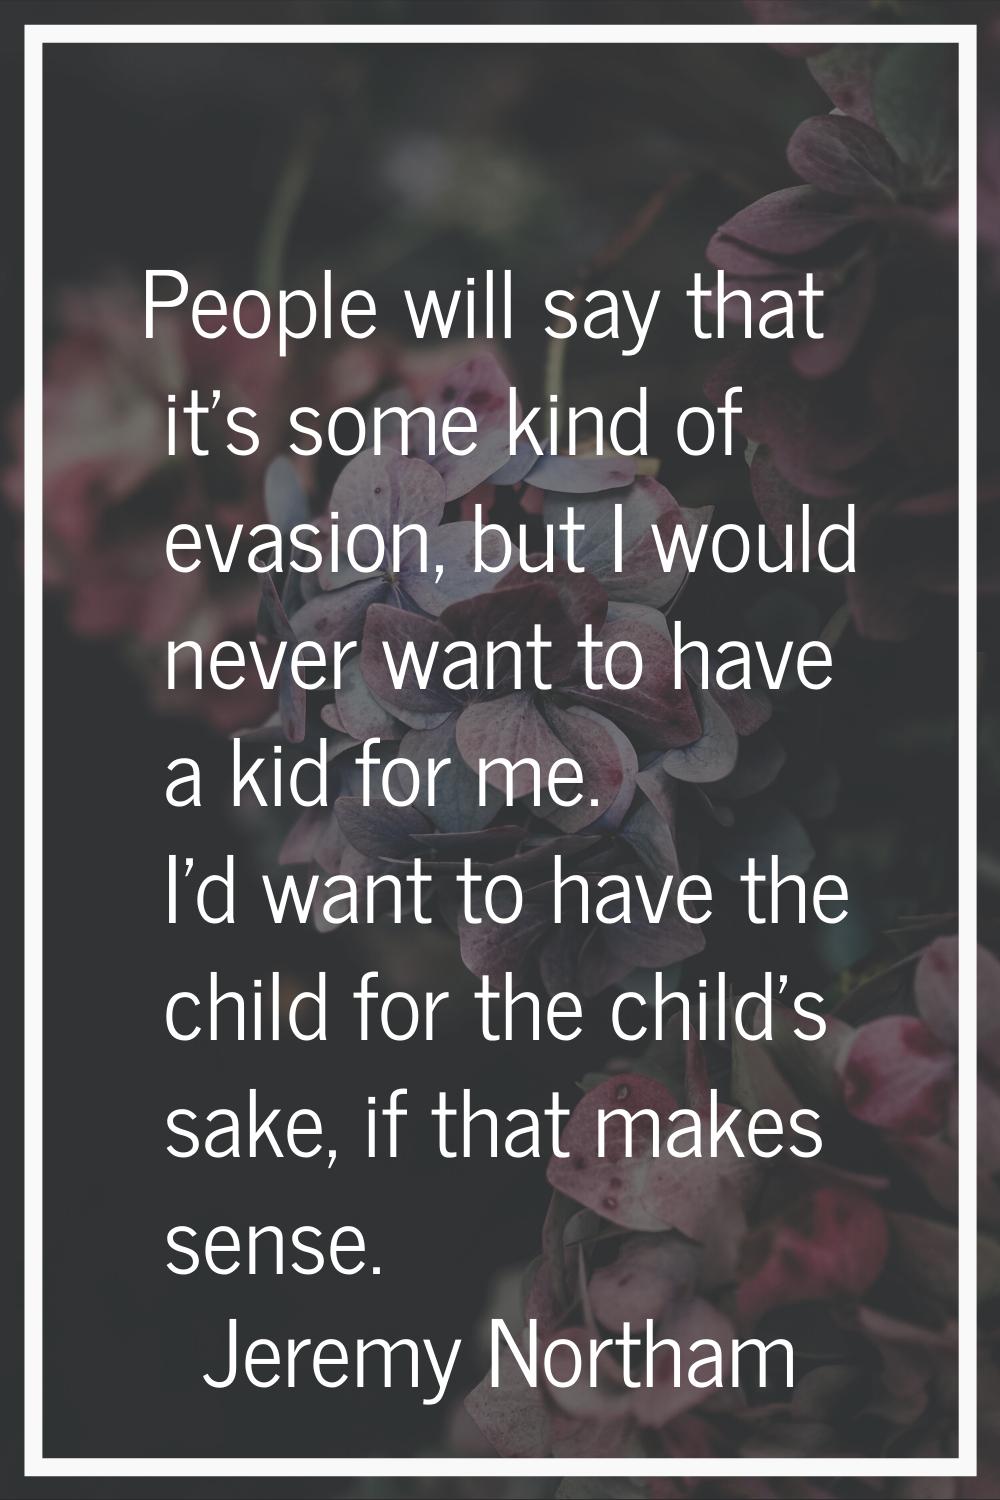 People will say that it's some kind of evasion, but I would never want to have a kid for me. I'd wa